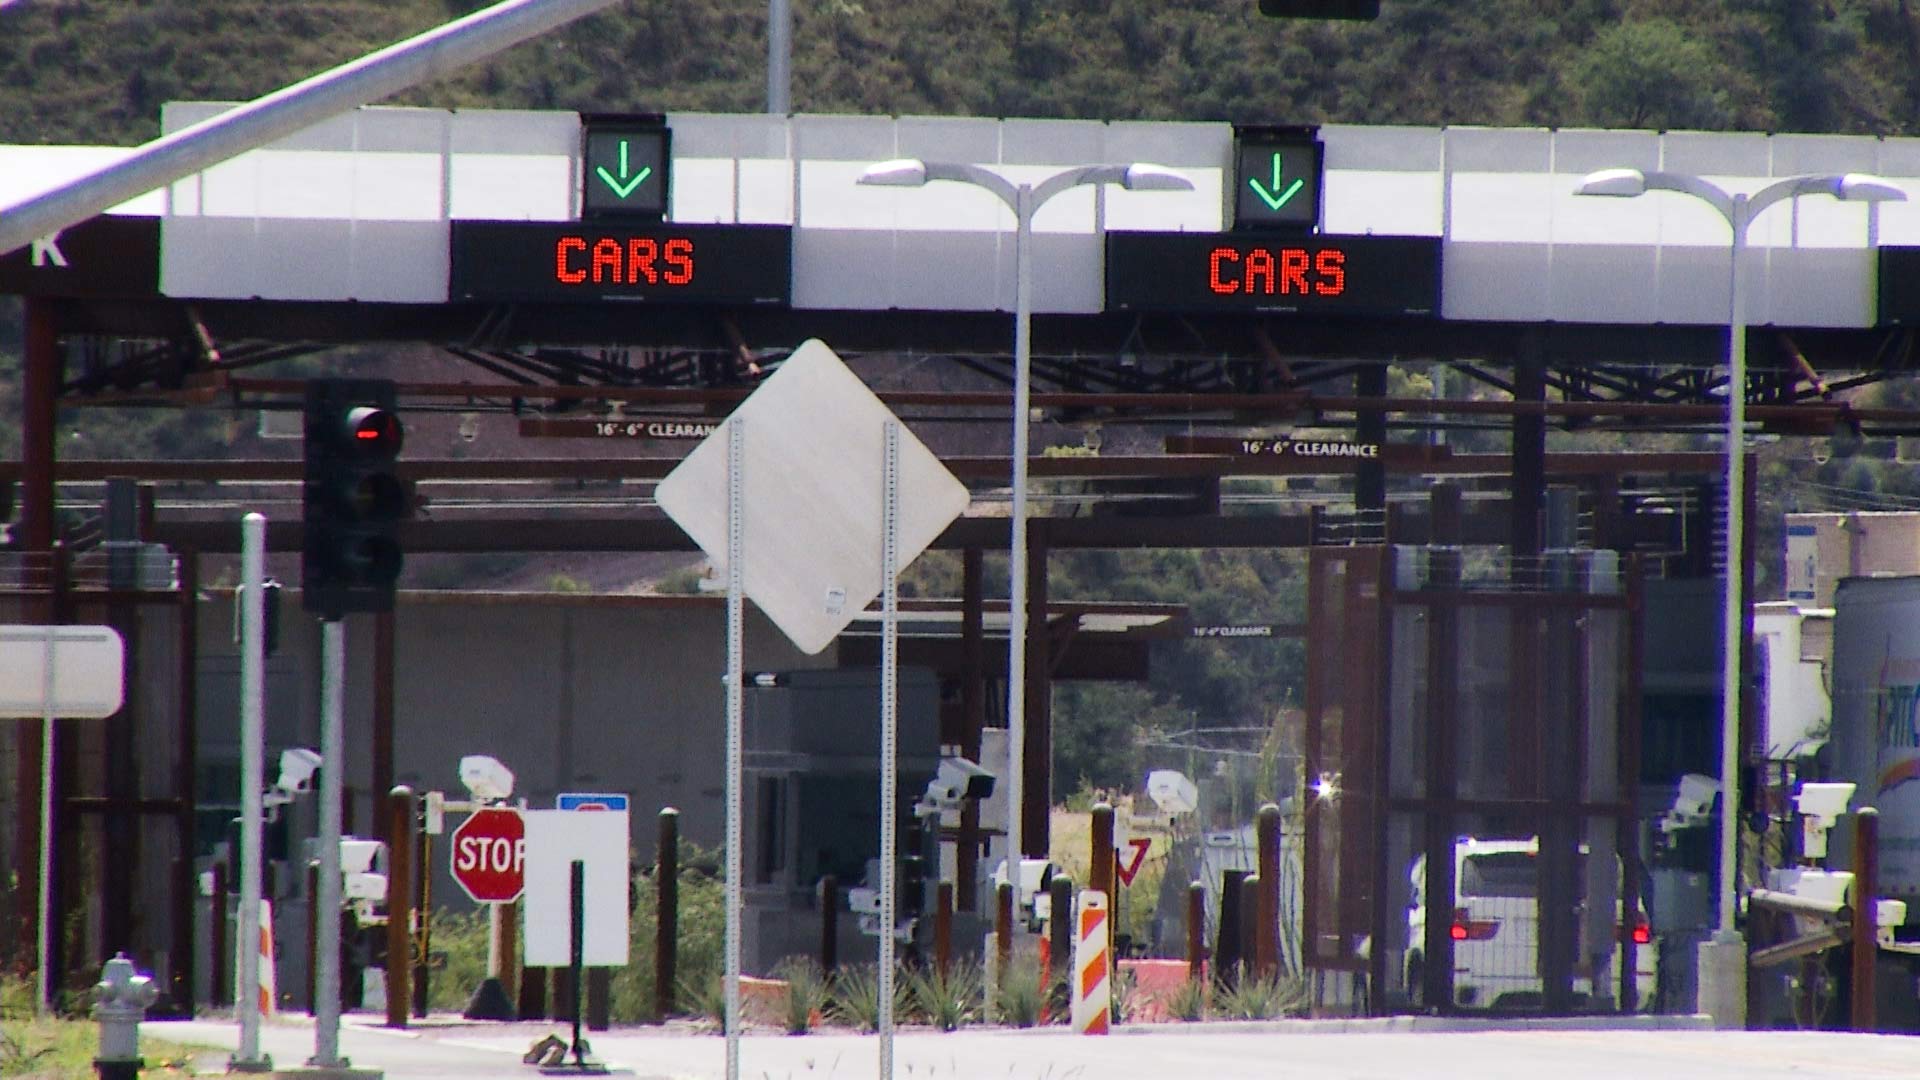 Lanes directing vehicles entering the United States at the Mariposa border crossing, Nogales.